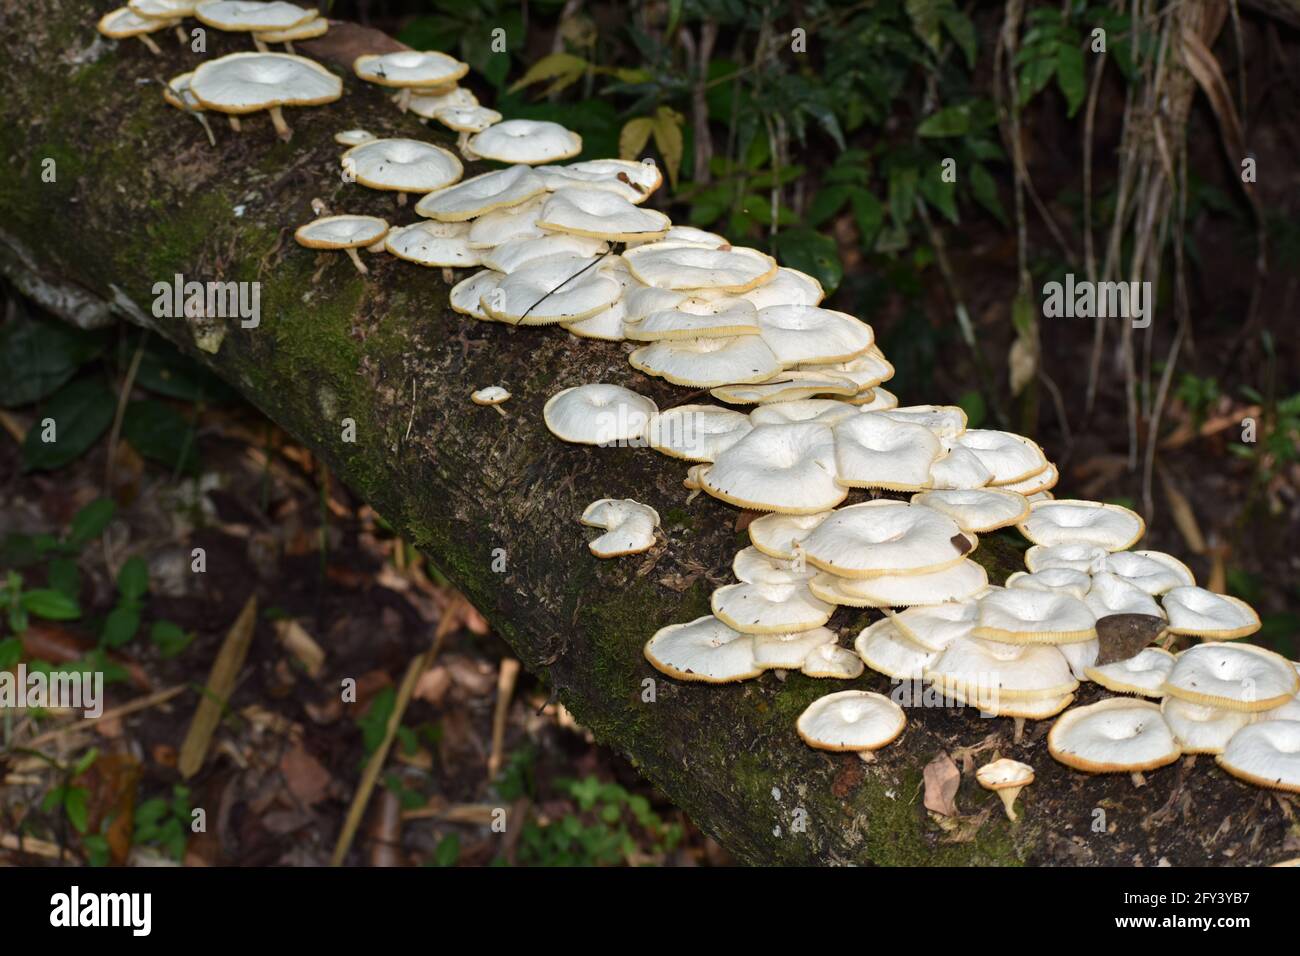 White mushrooms growing on a dead tree bark in a rainforest forest located on the northern range of Trinidad. Stock Photo